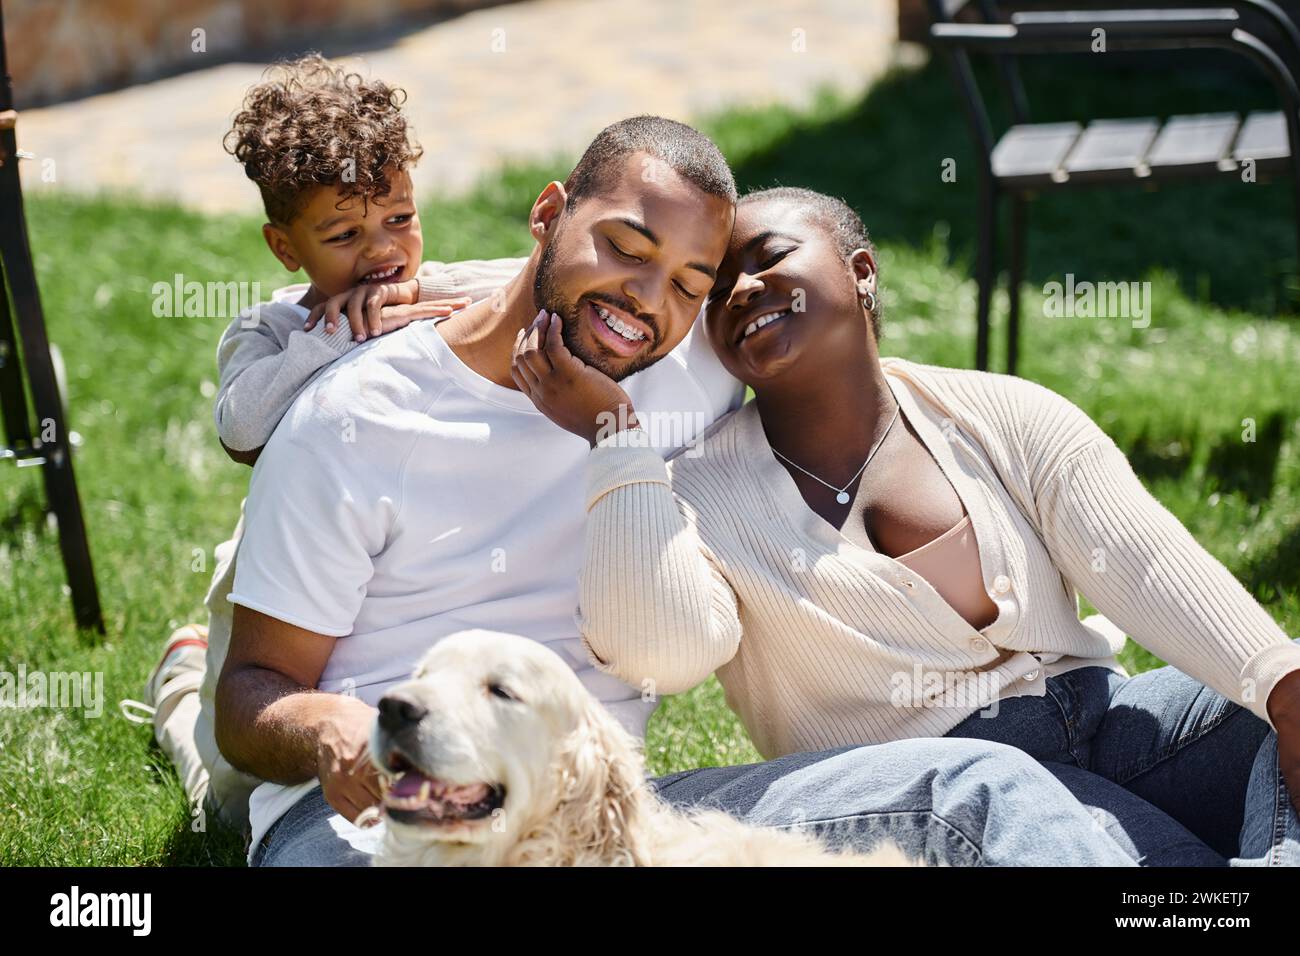 family moment of happy african american parents and son smiling and sitting on green lawn near dog Stock Photo